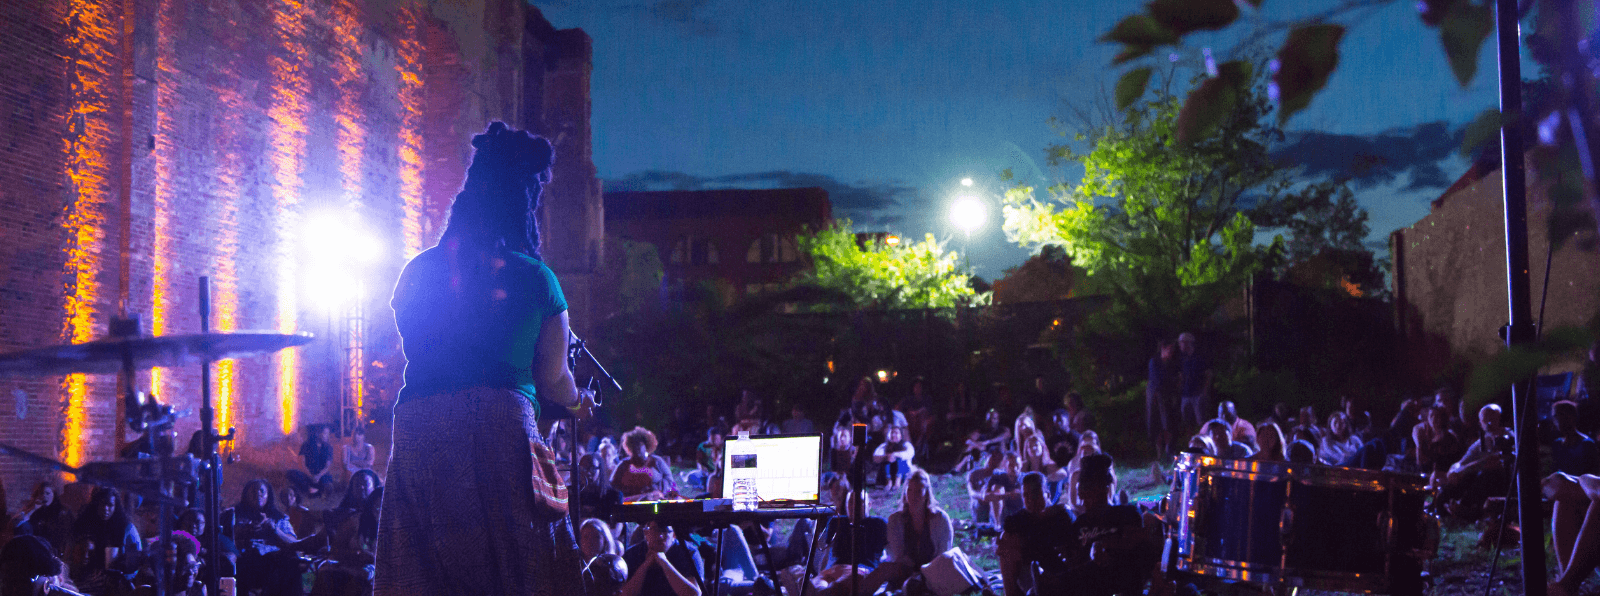 Person facing a seated outdoors crowd performing at night with back towards camera